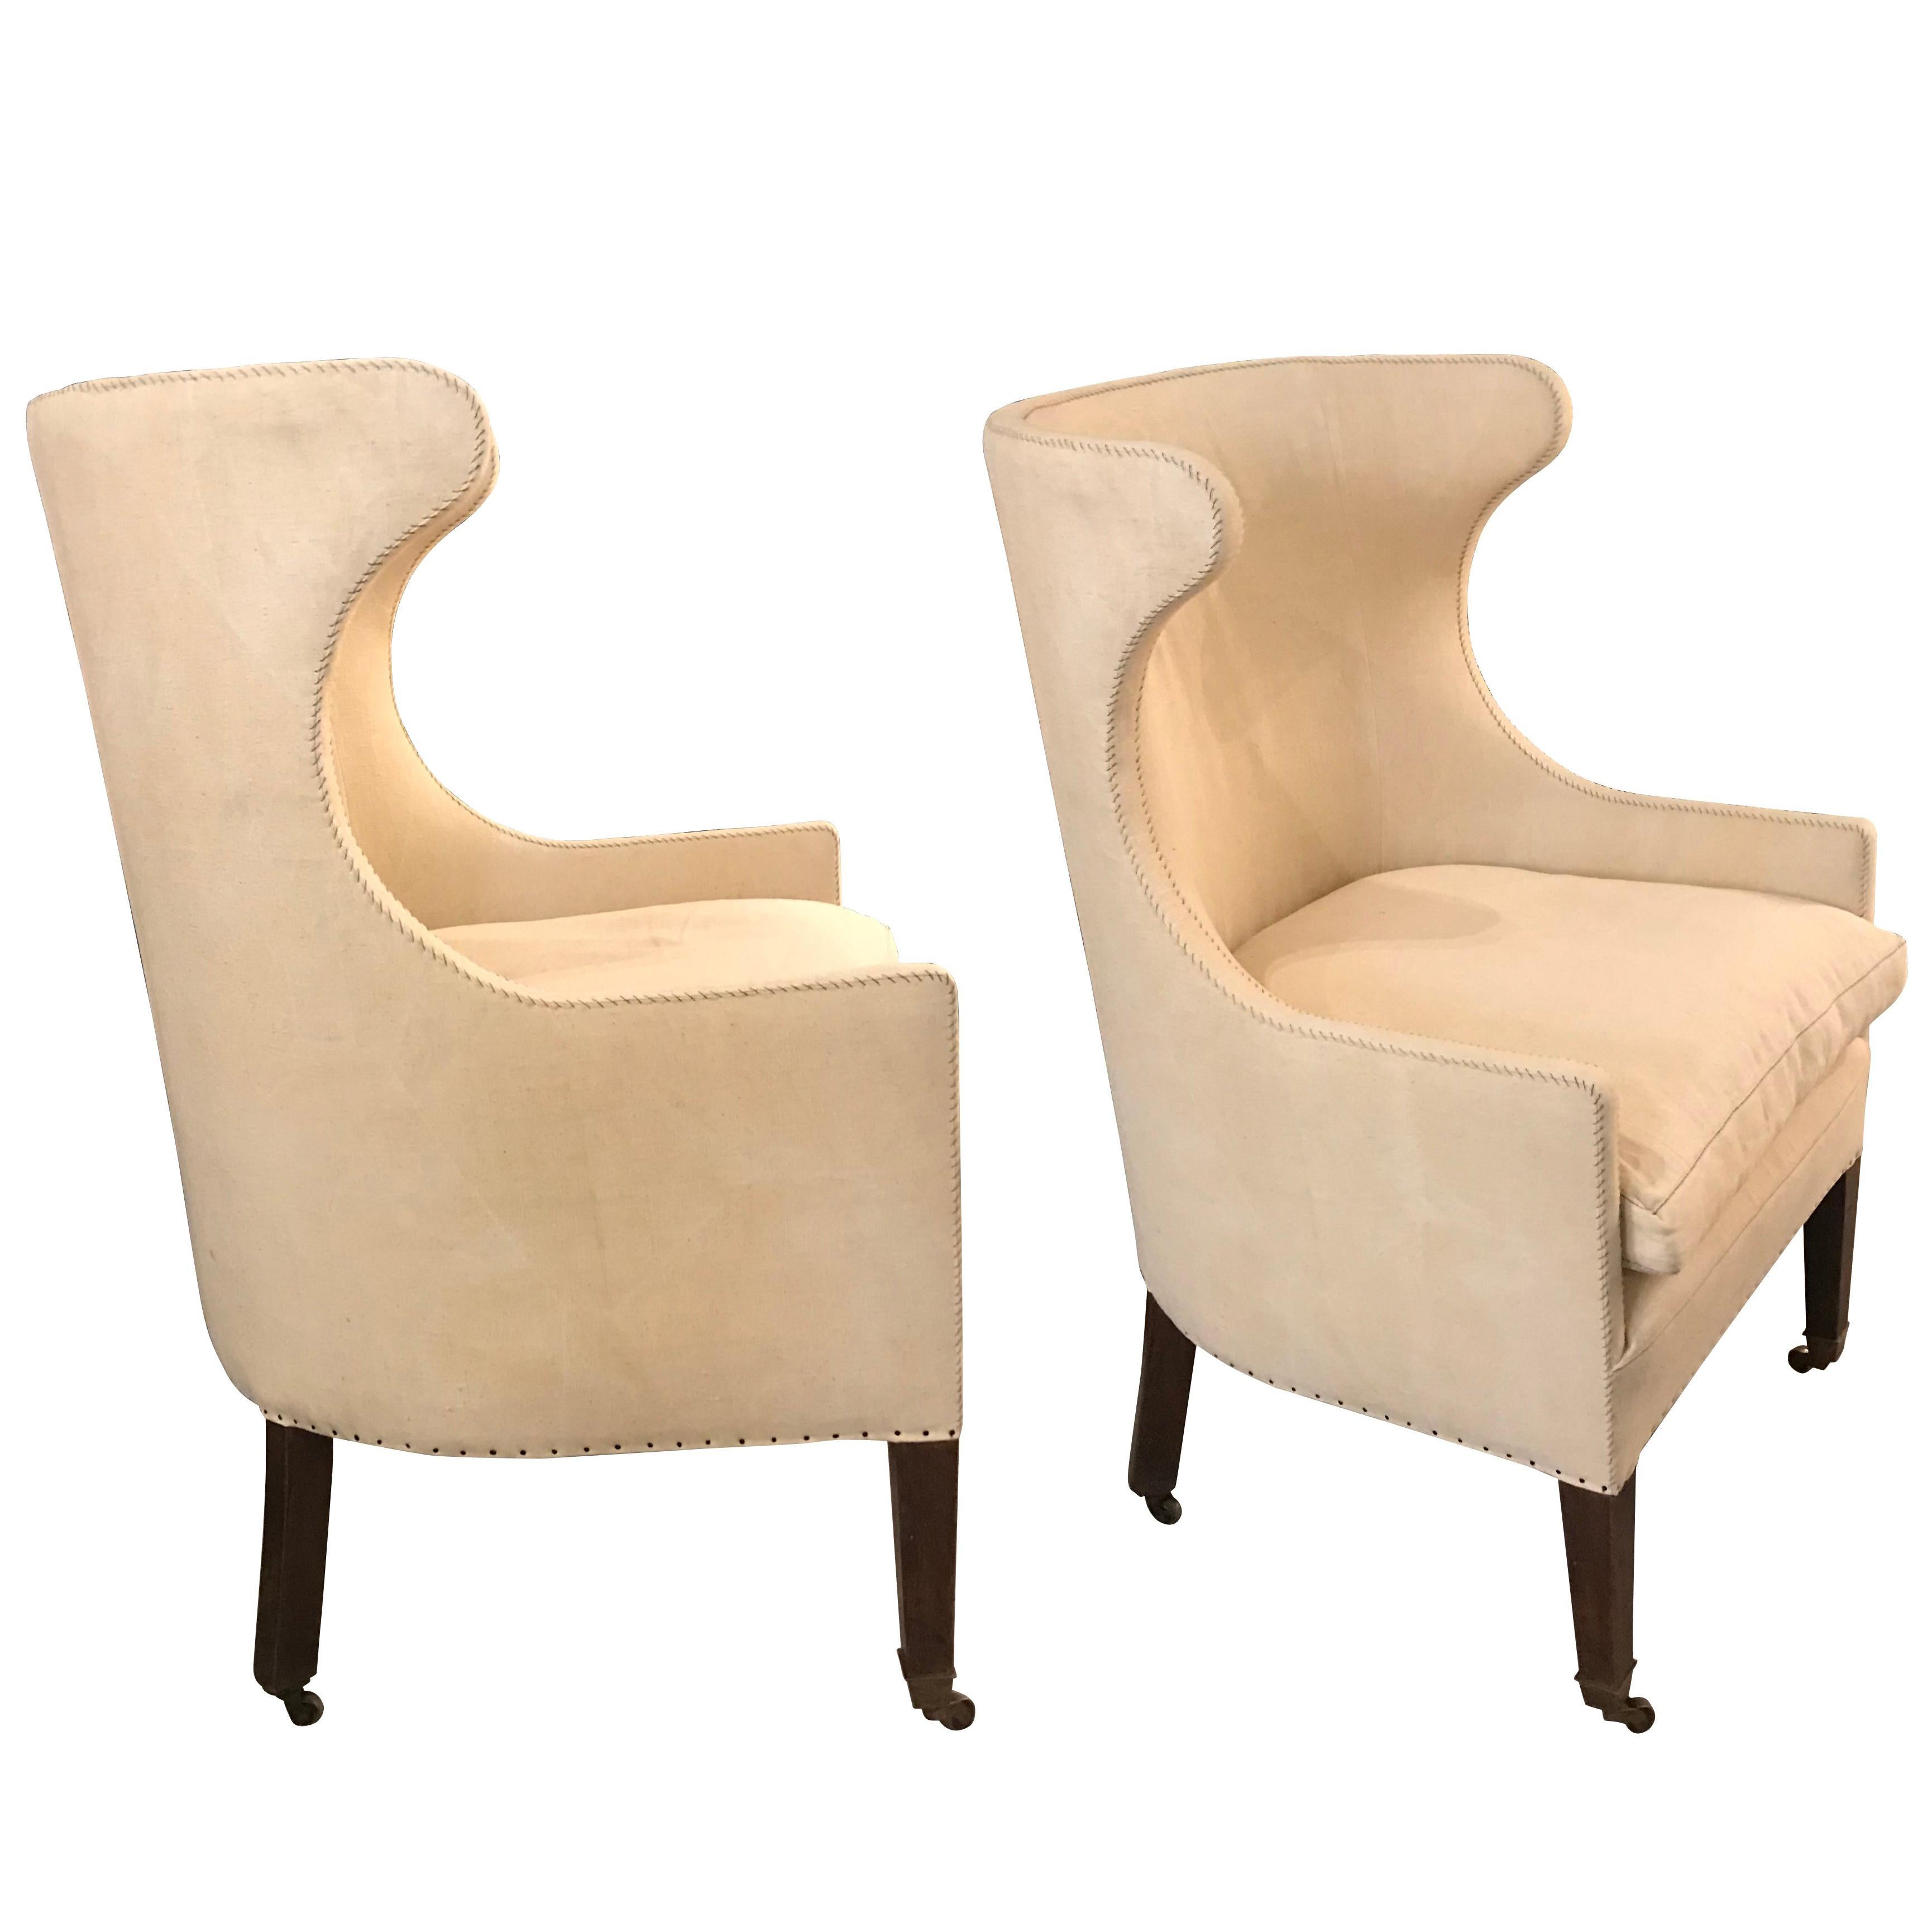 19th Century English Pair of Barrel Back Wing Chairs